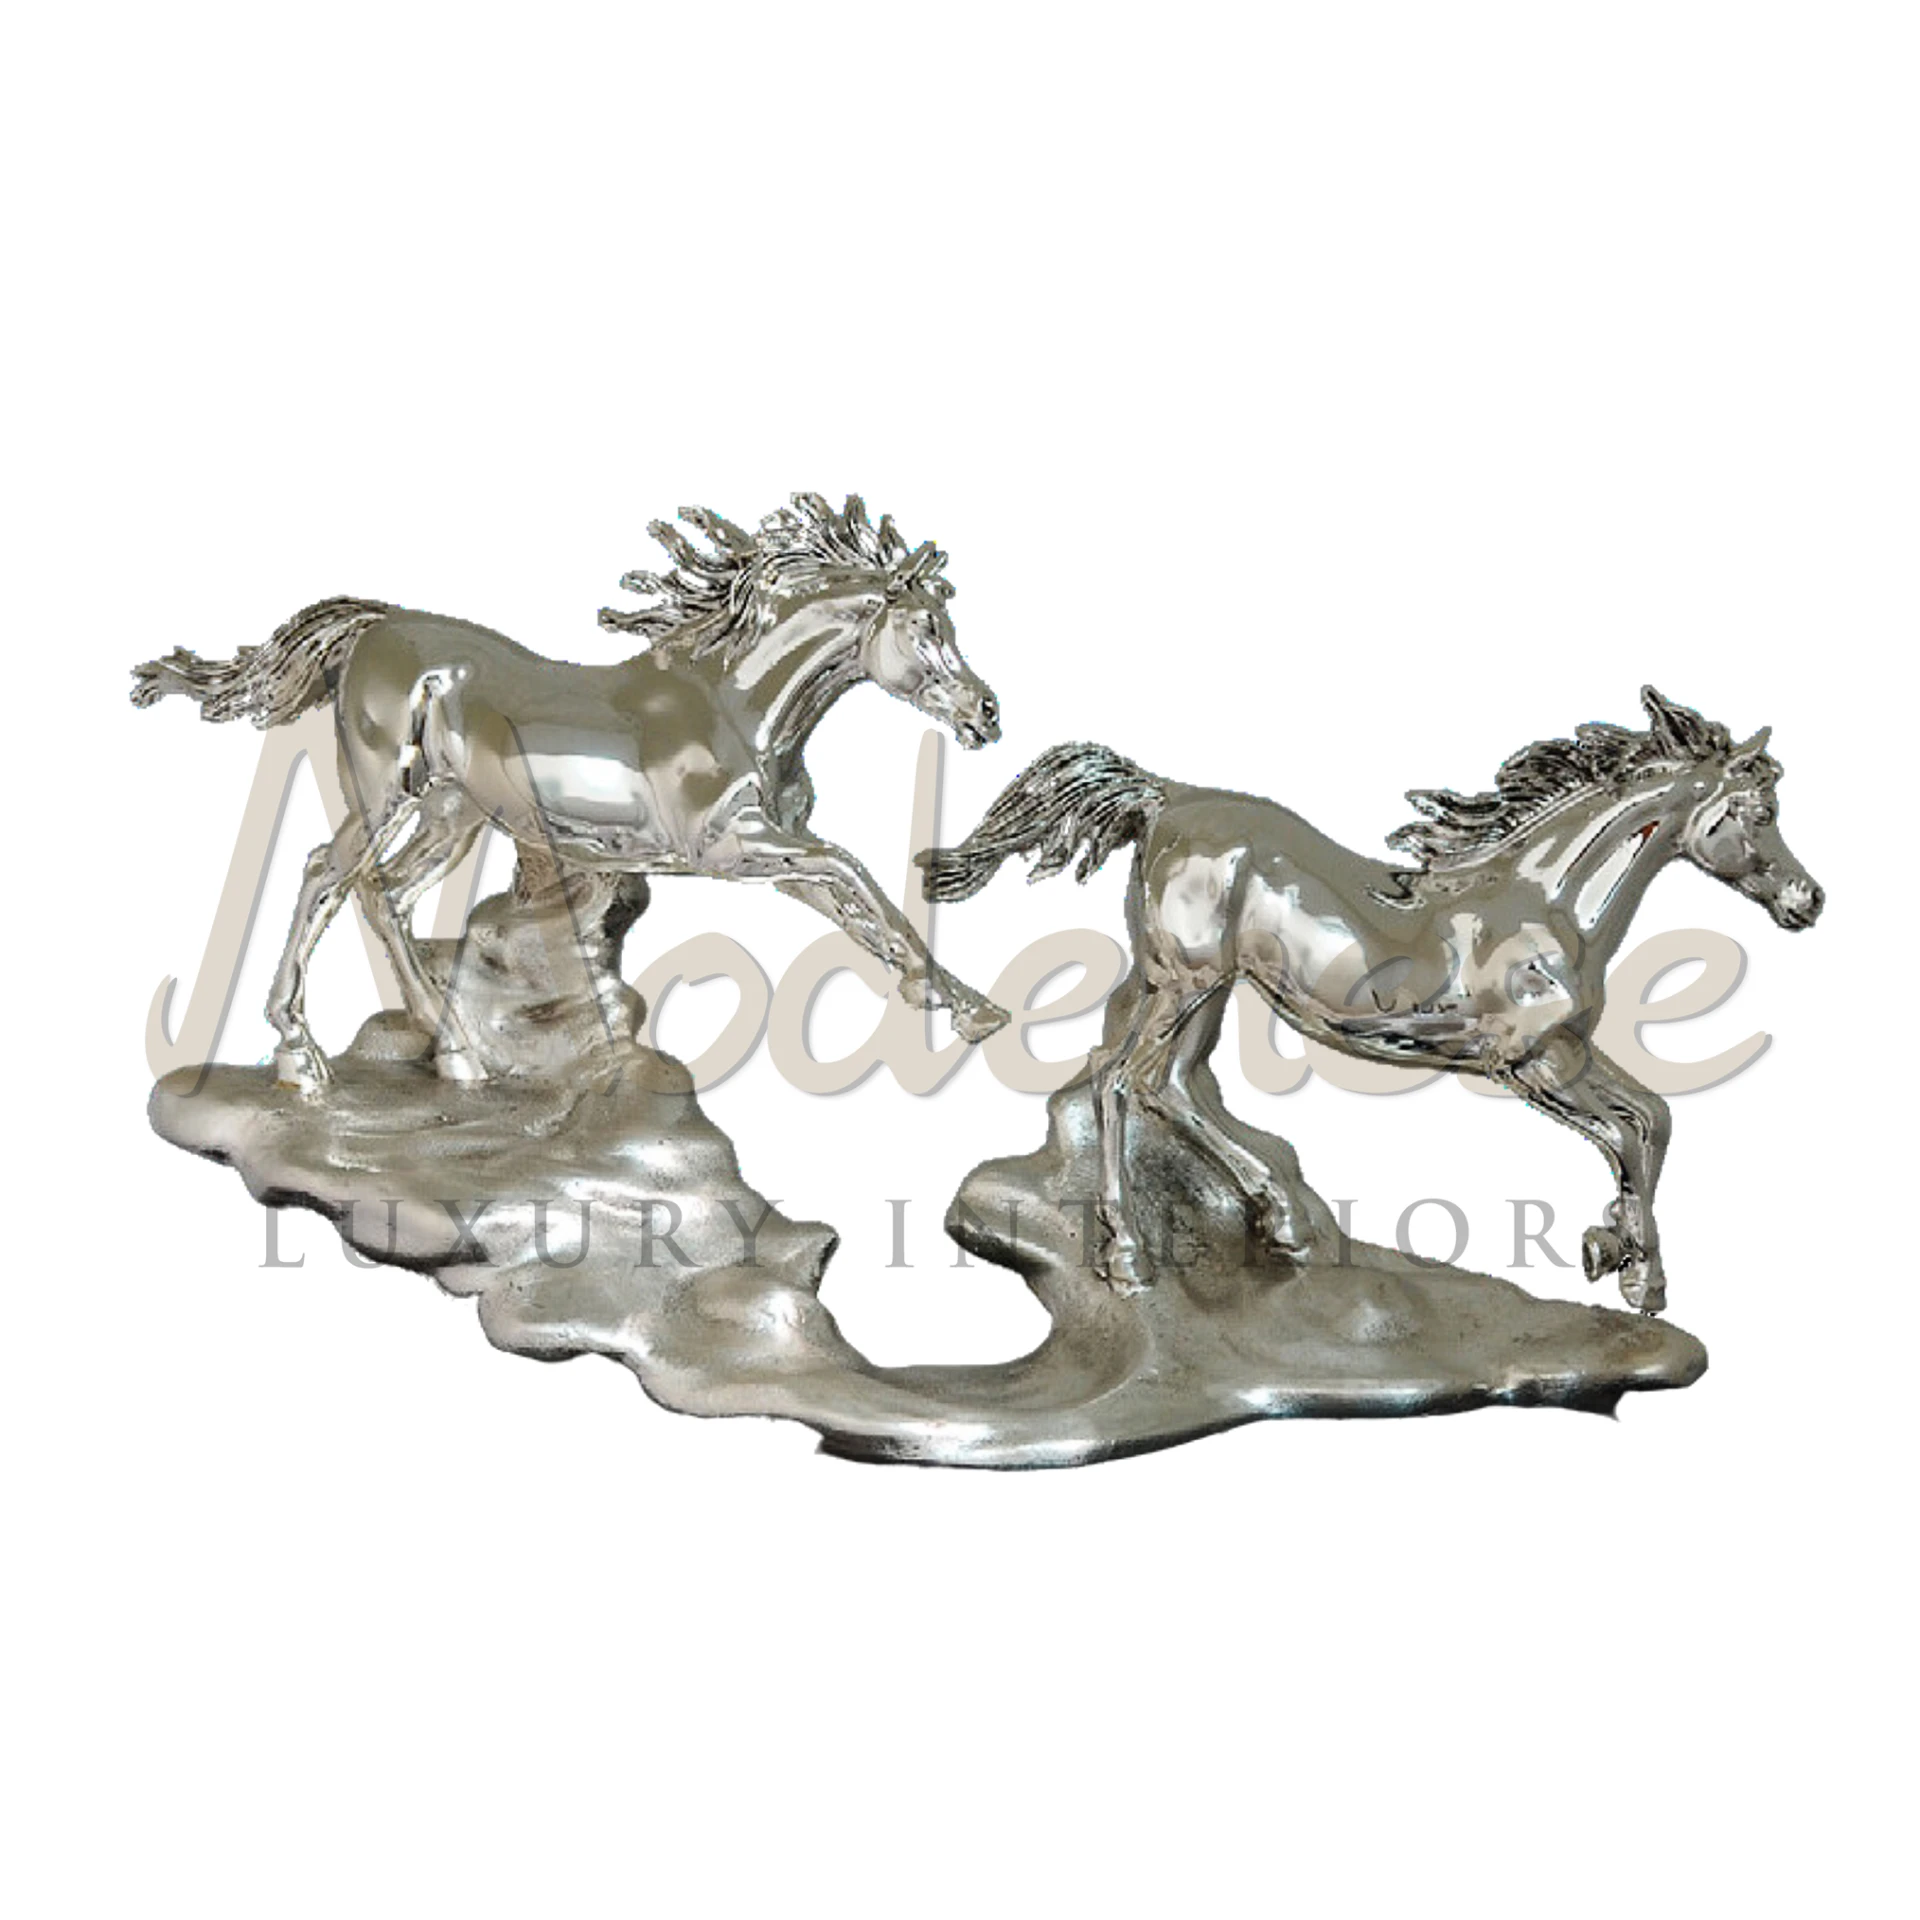 Luxury Silver Horse Set featuring statues and figurines with intricate details, ideal for sophisticated interior design.